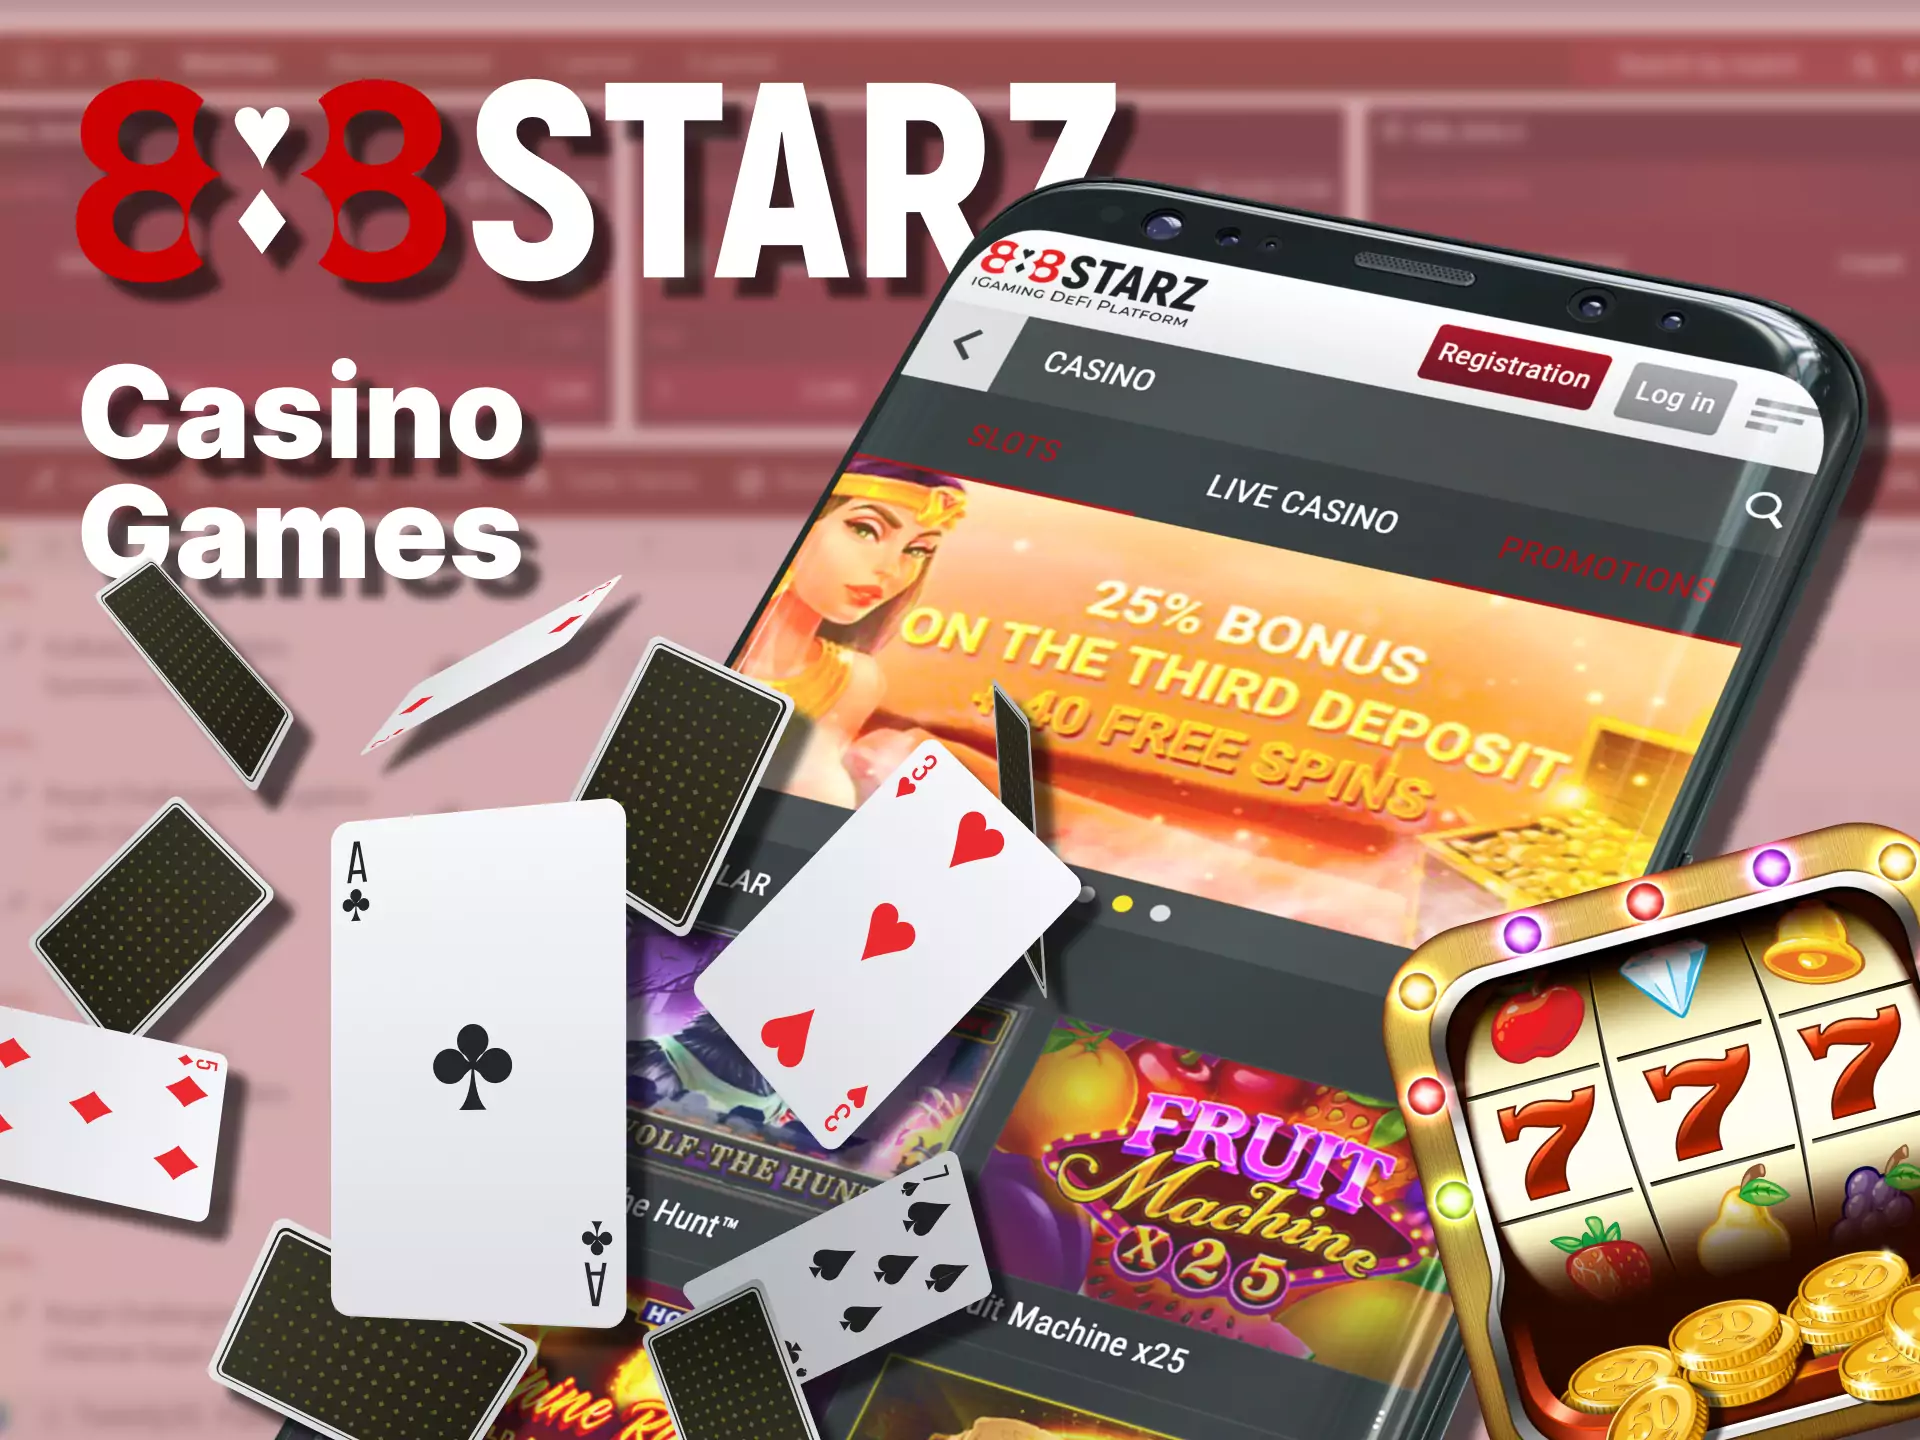 The casino at 888starz app offers you many different games.